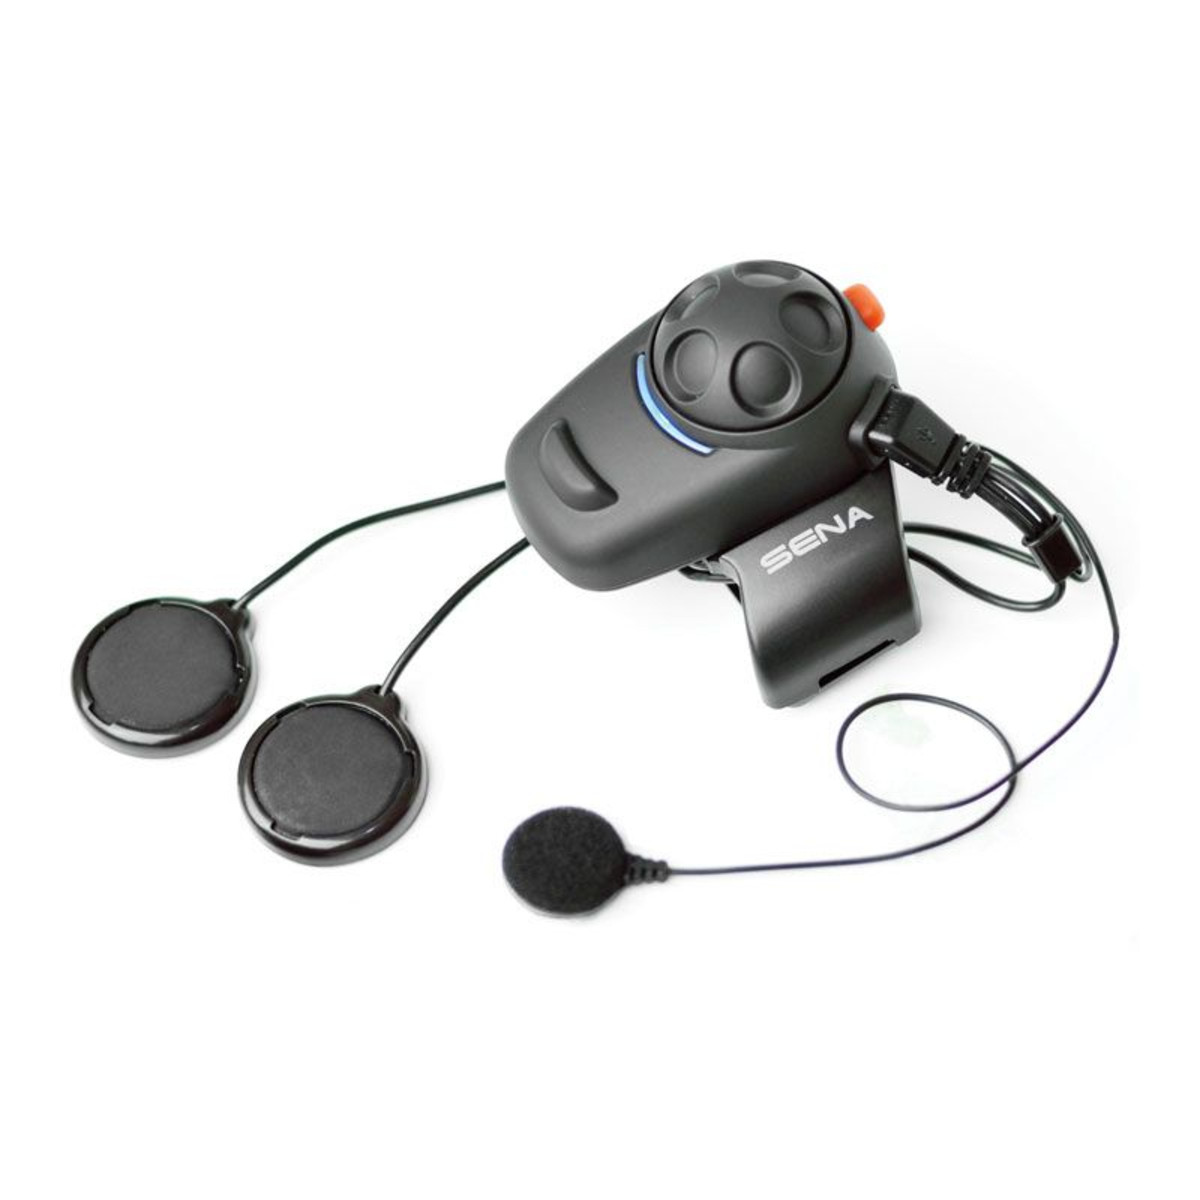 Sena Bluetooth Headset & Intercom for Scooters and Motorcycles with Universal Microphone Kit (p/n- SMH5 )